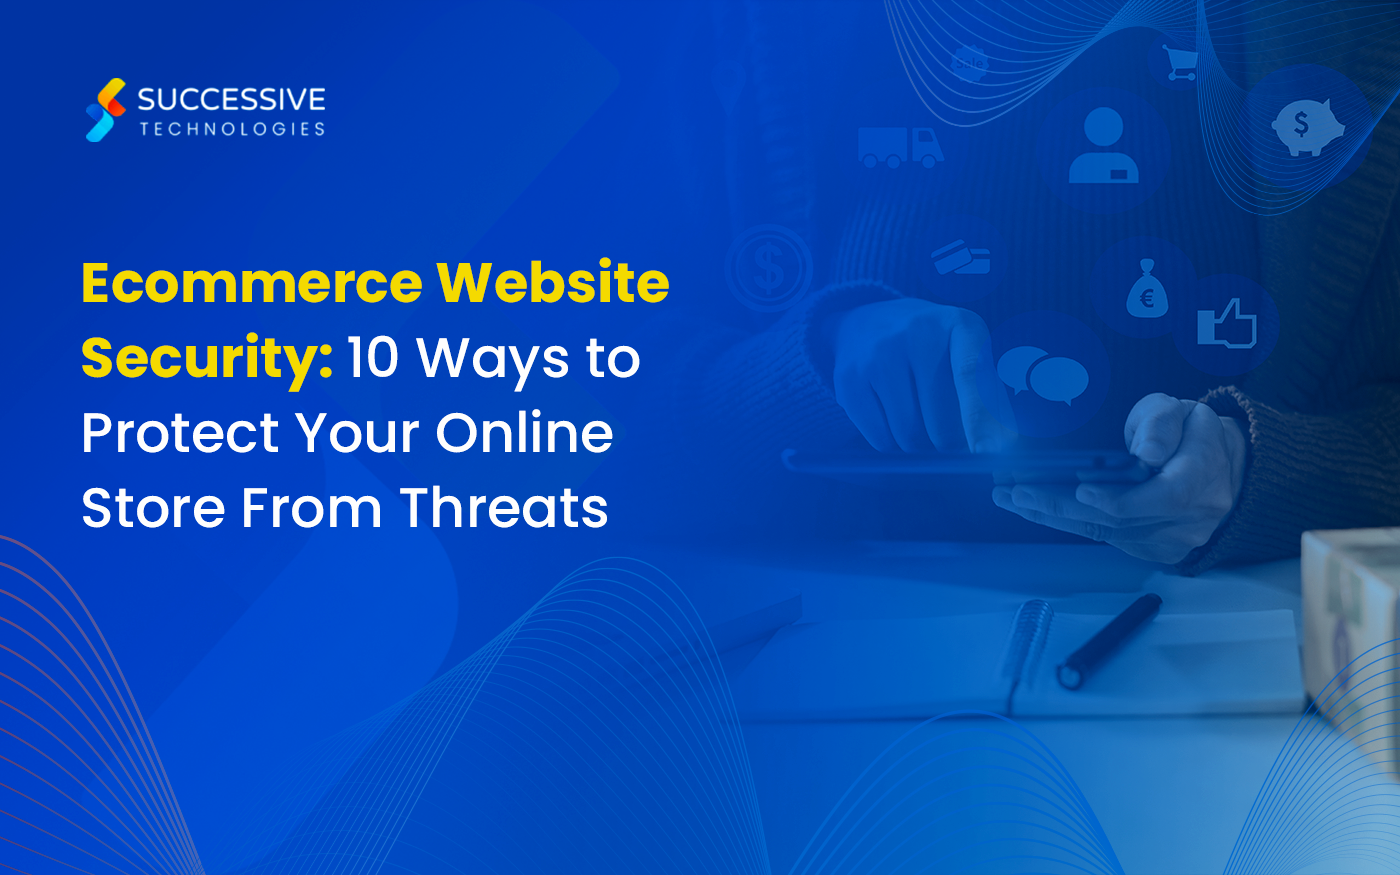 Ecommerce Website Security: 10 Ways to Protect Your Online Store From Threats